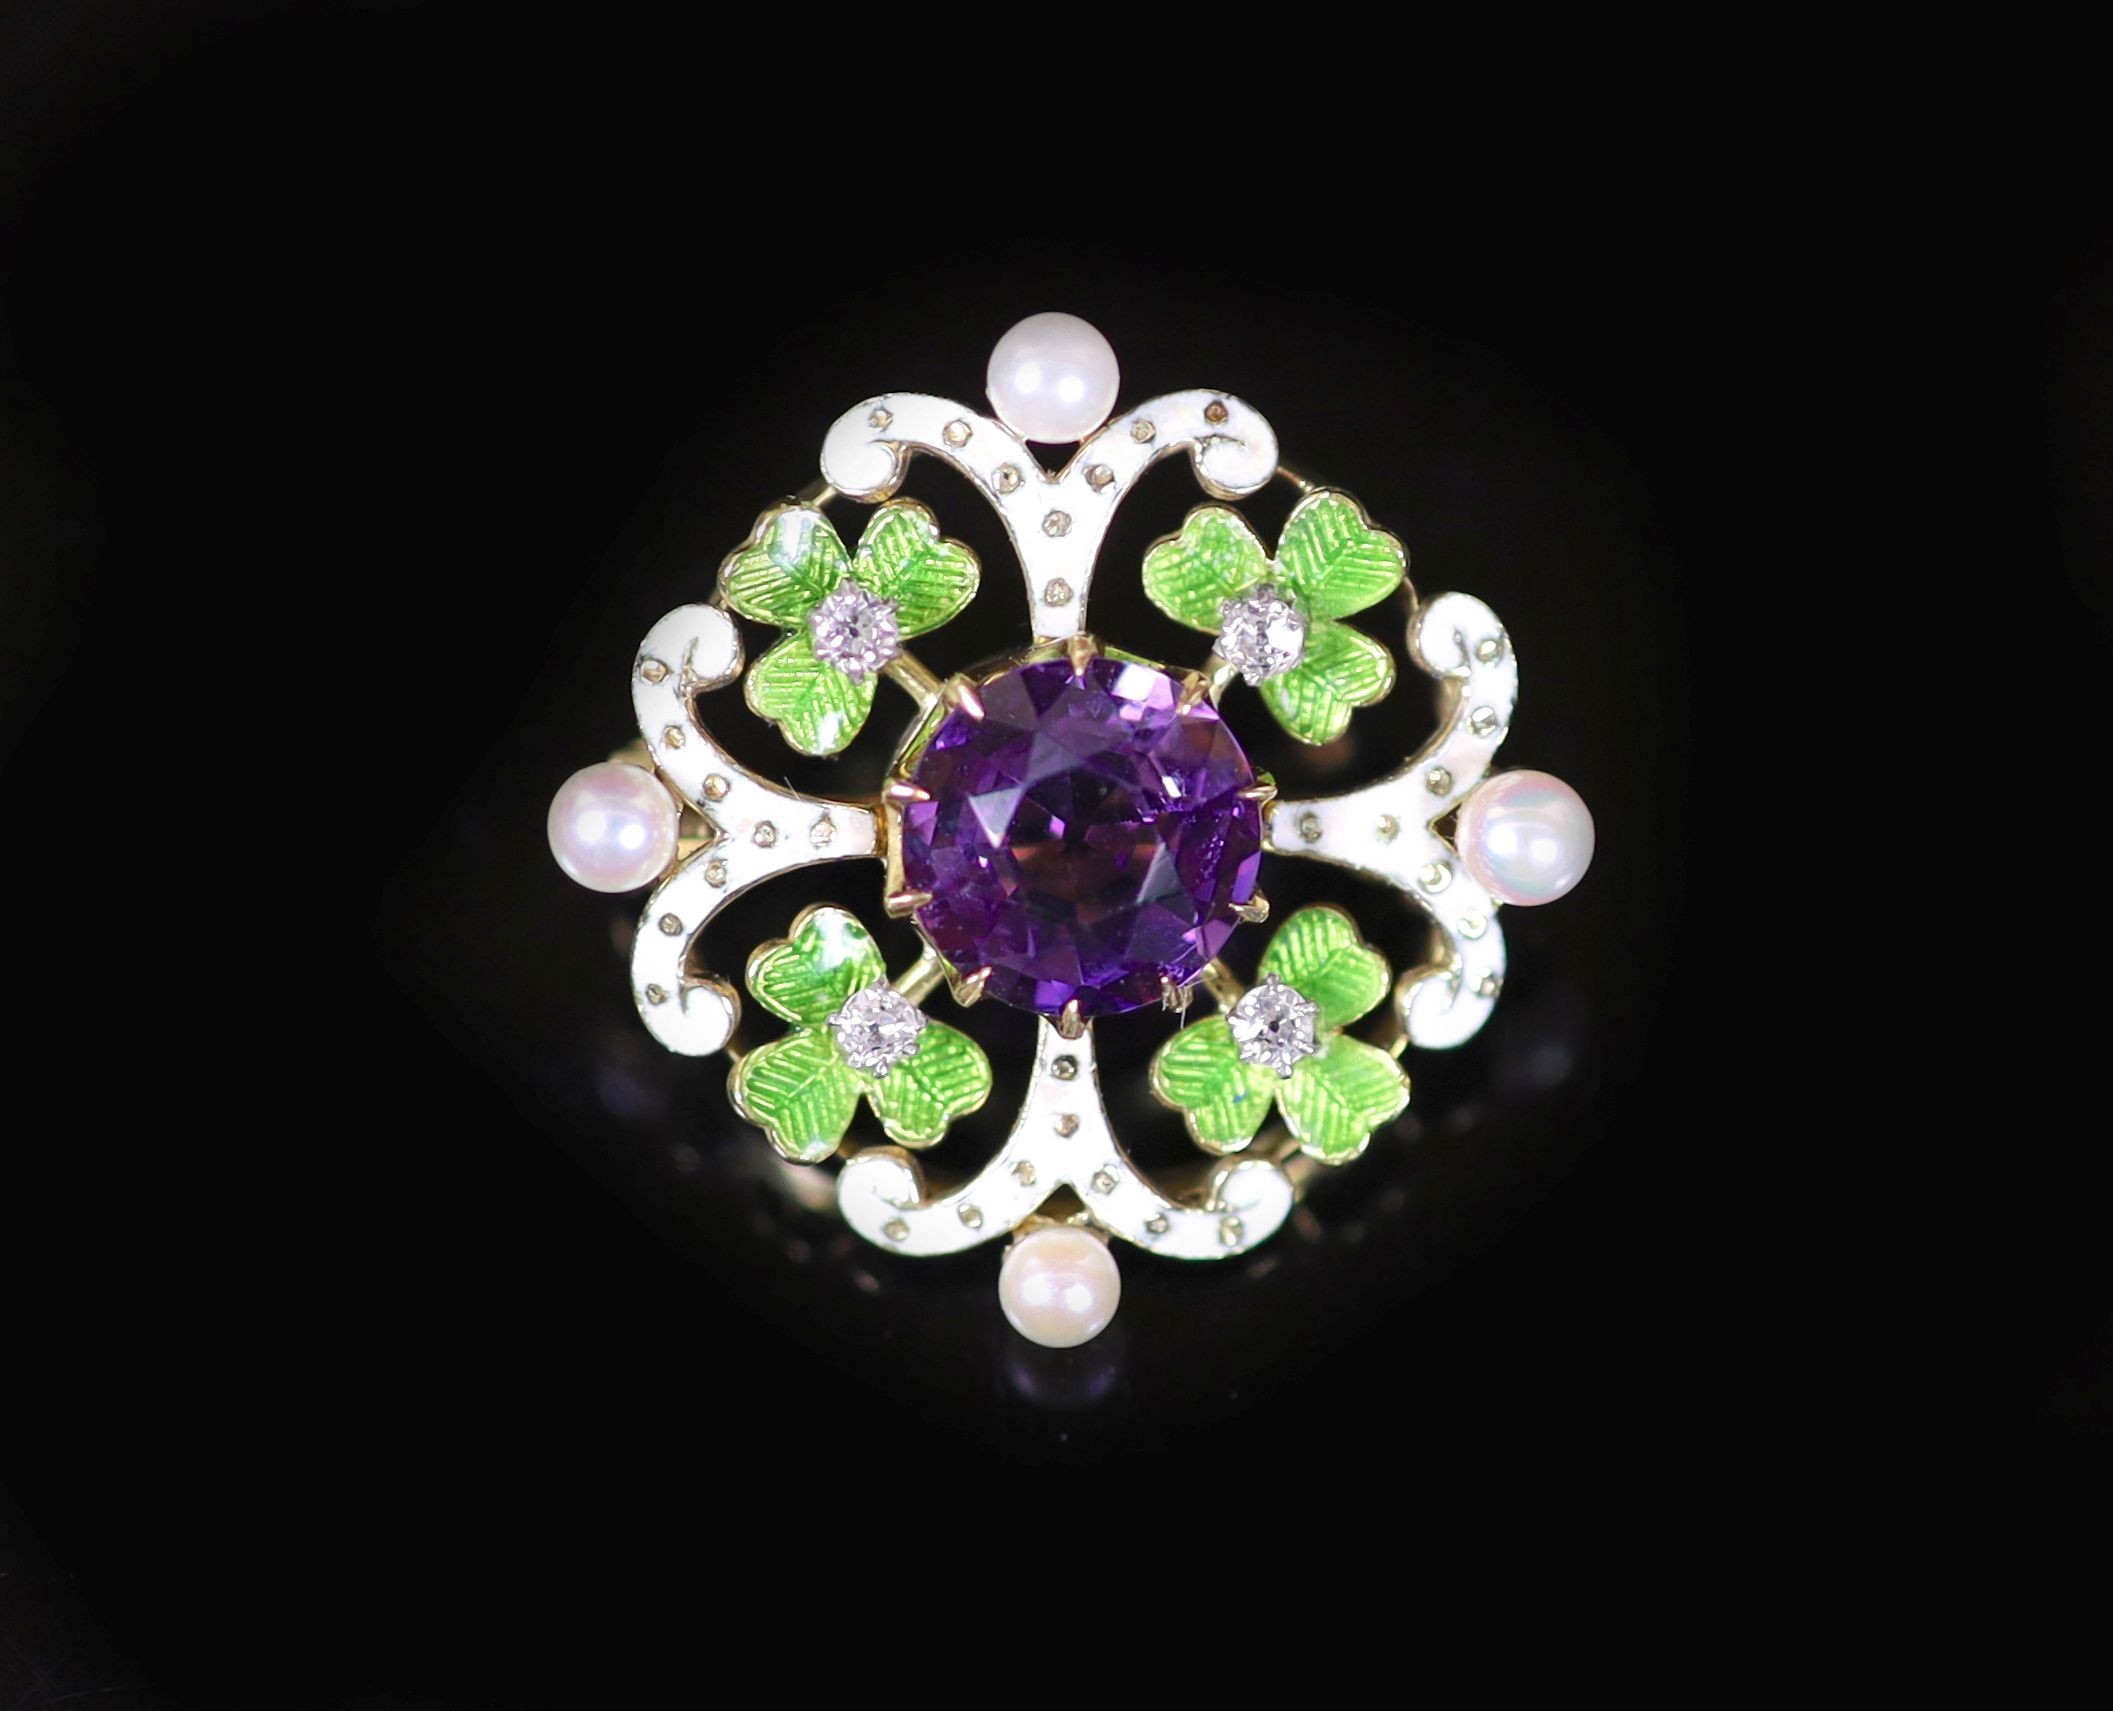 An early 20th century pierced gold, amethyst, seed pearl, green and white enamel set circular brooch, in the Suffragette colours